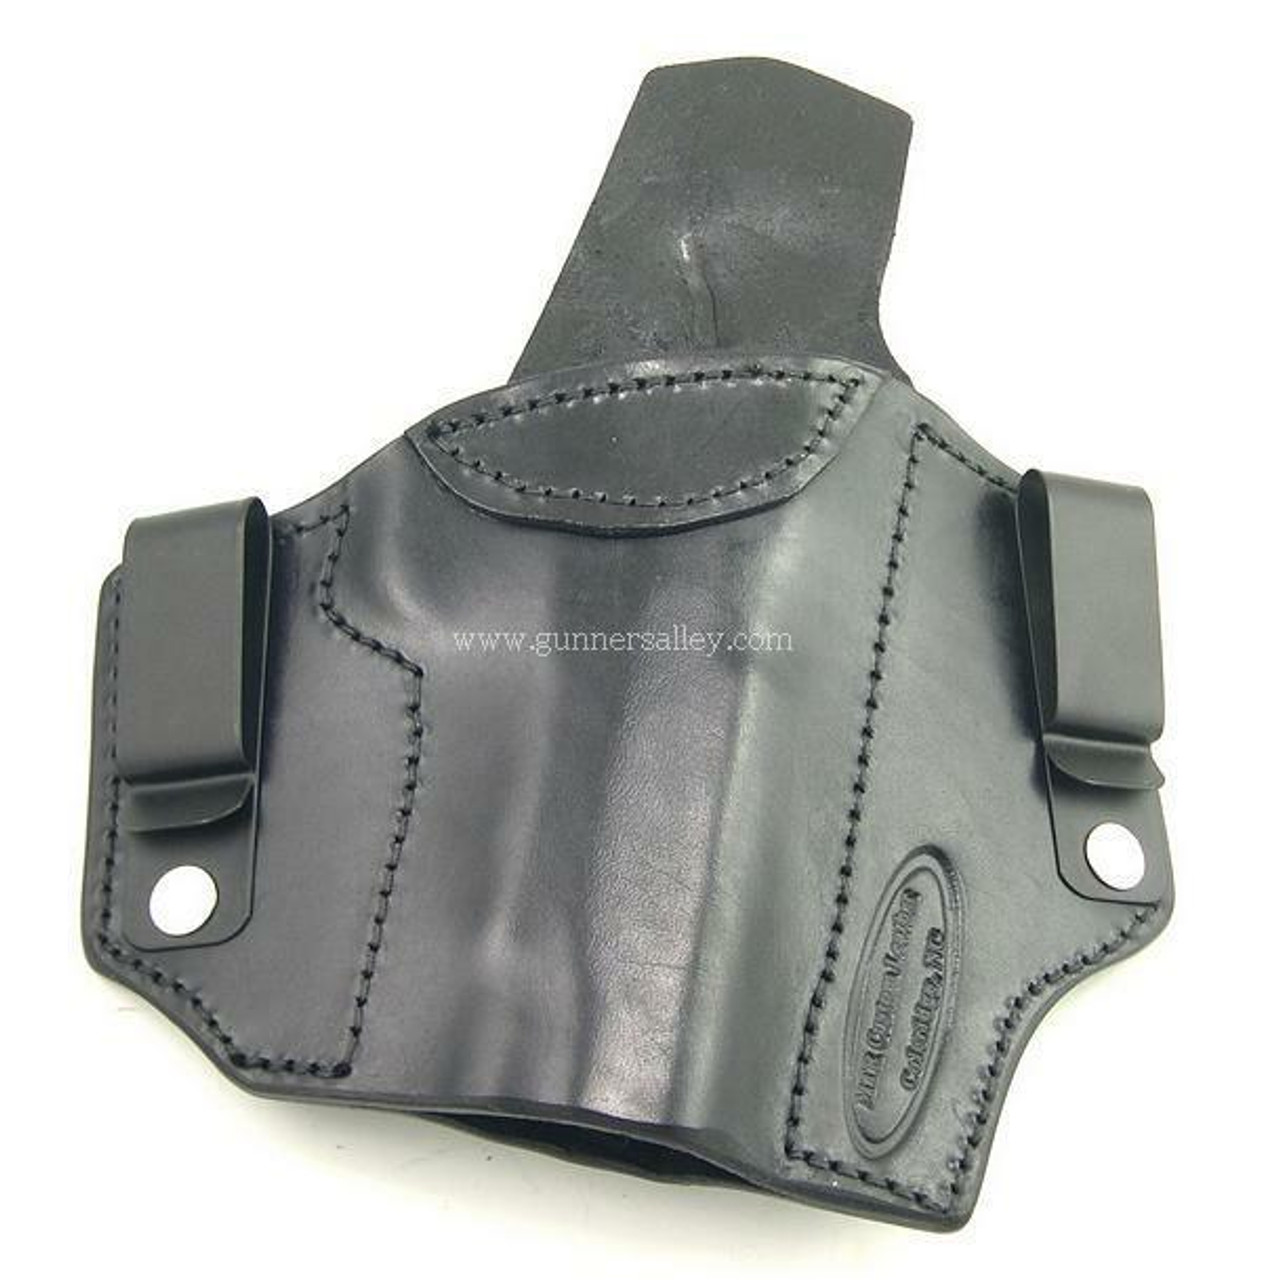 Fits CZ 2075 RAMI hybrid IWB  Holster By Chief’s Holsters 